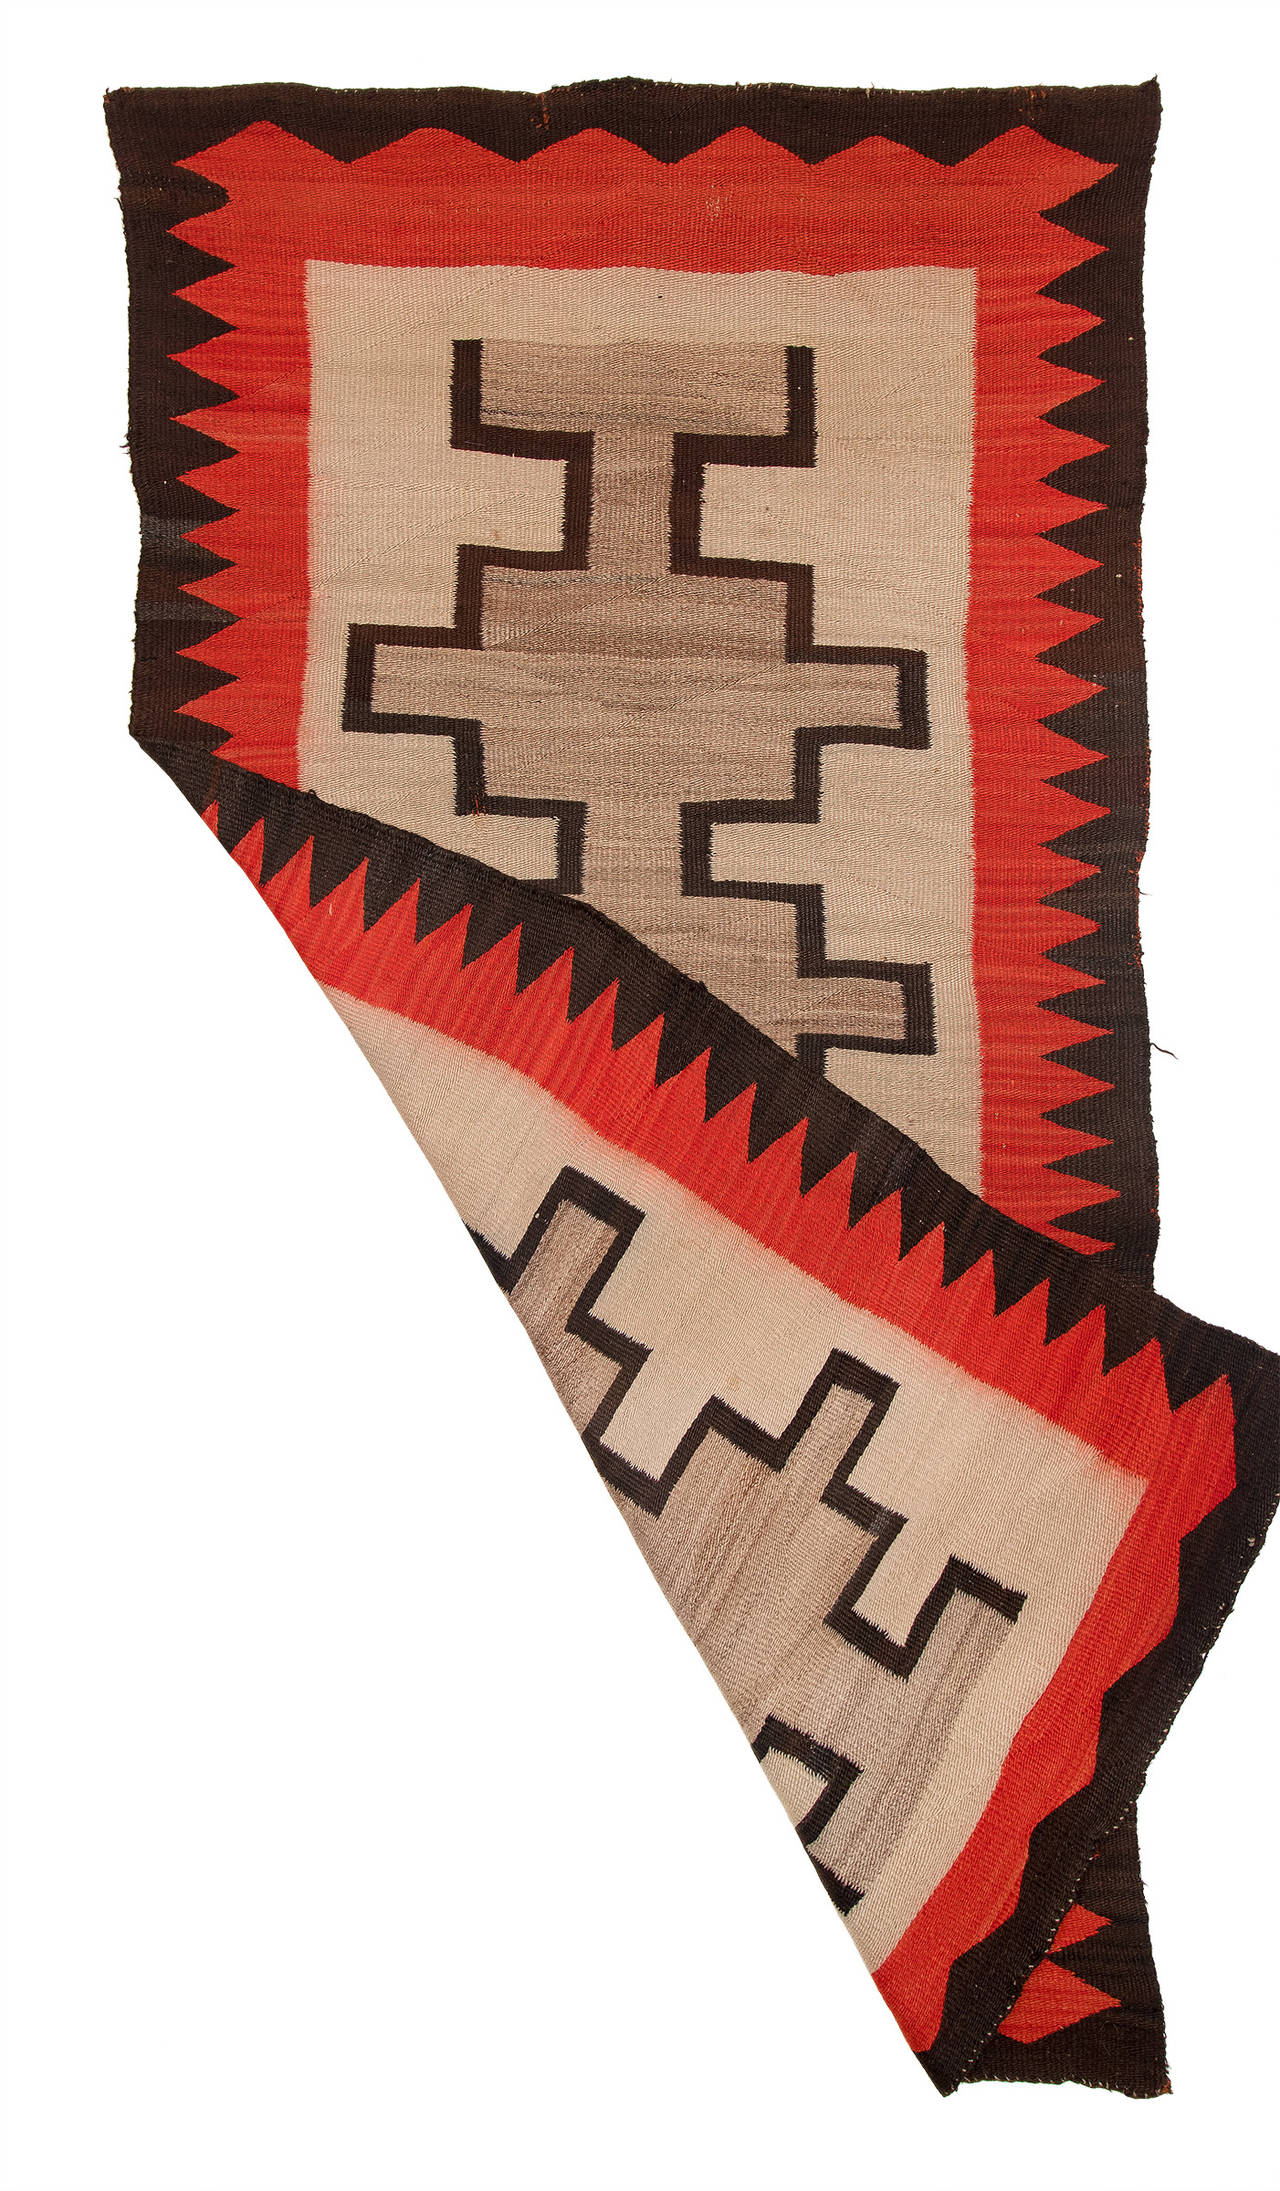 A vintage trading post rug/floor runner woven of native handspun wool in natural ivory, gray and brown fleece with aniline dyed red. Most likely from the Ganado Trading Post (founded by John Lorenzo Hubbell at Ganado, Arizona, in 1876).

This